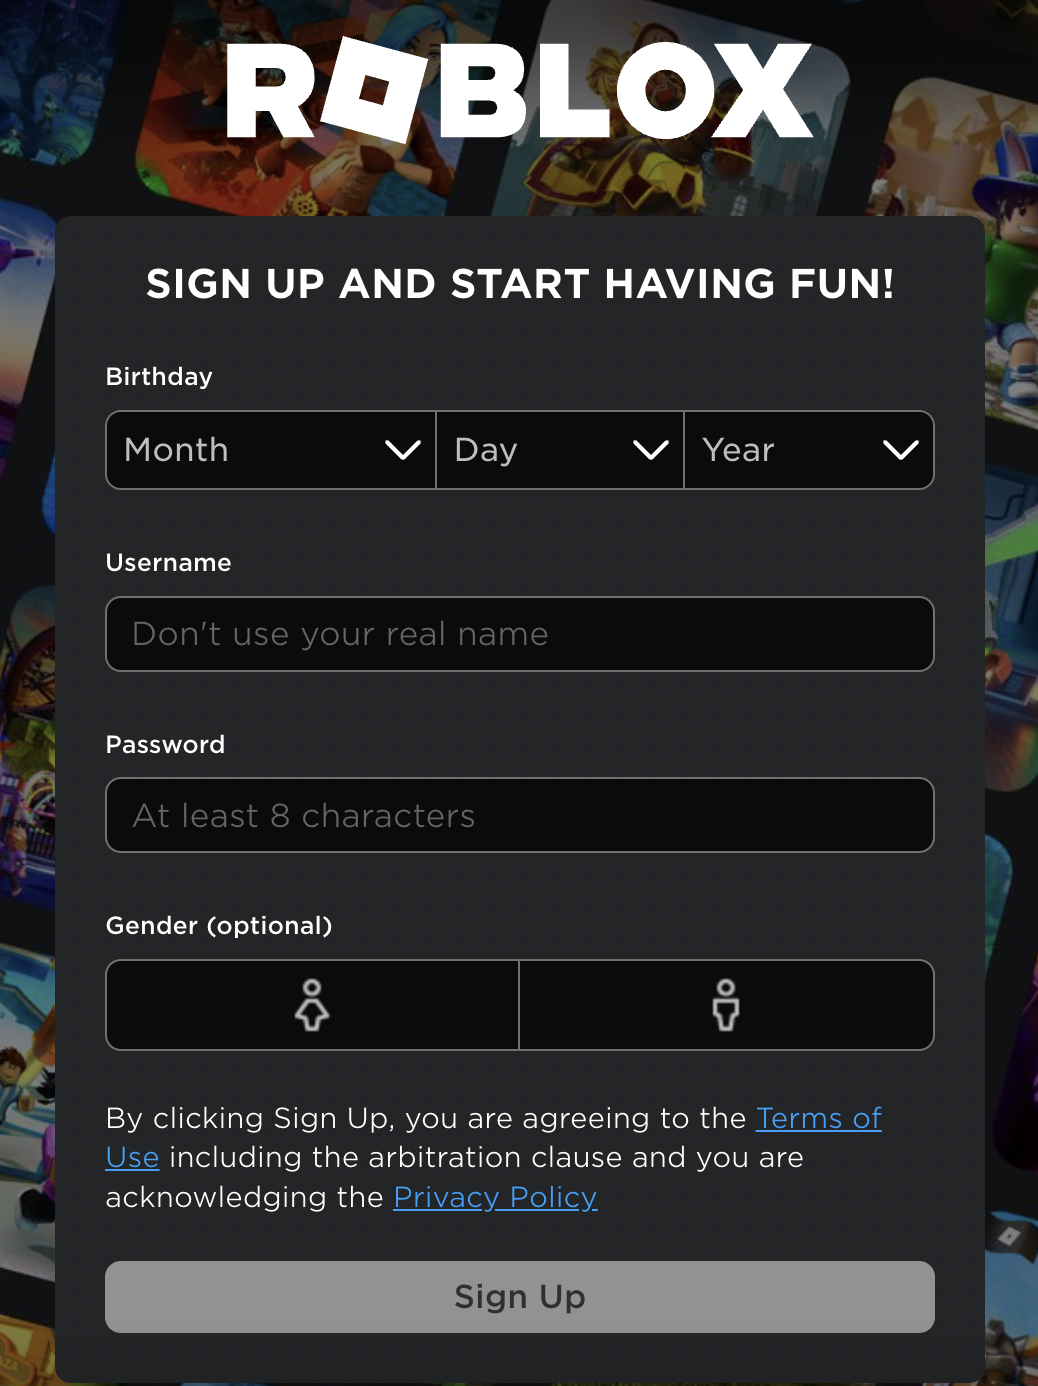 Enter Details to Sign Up Free Roblox Account to get Free Robux